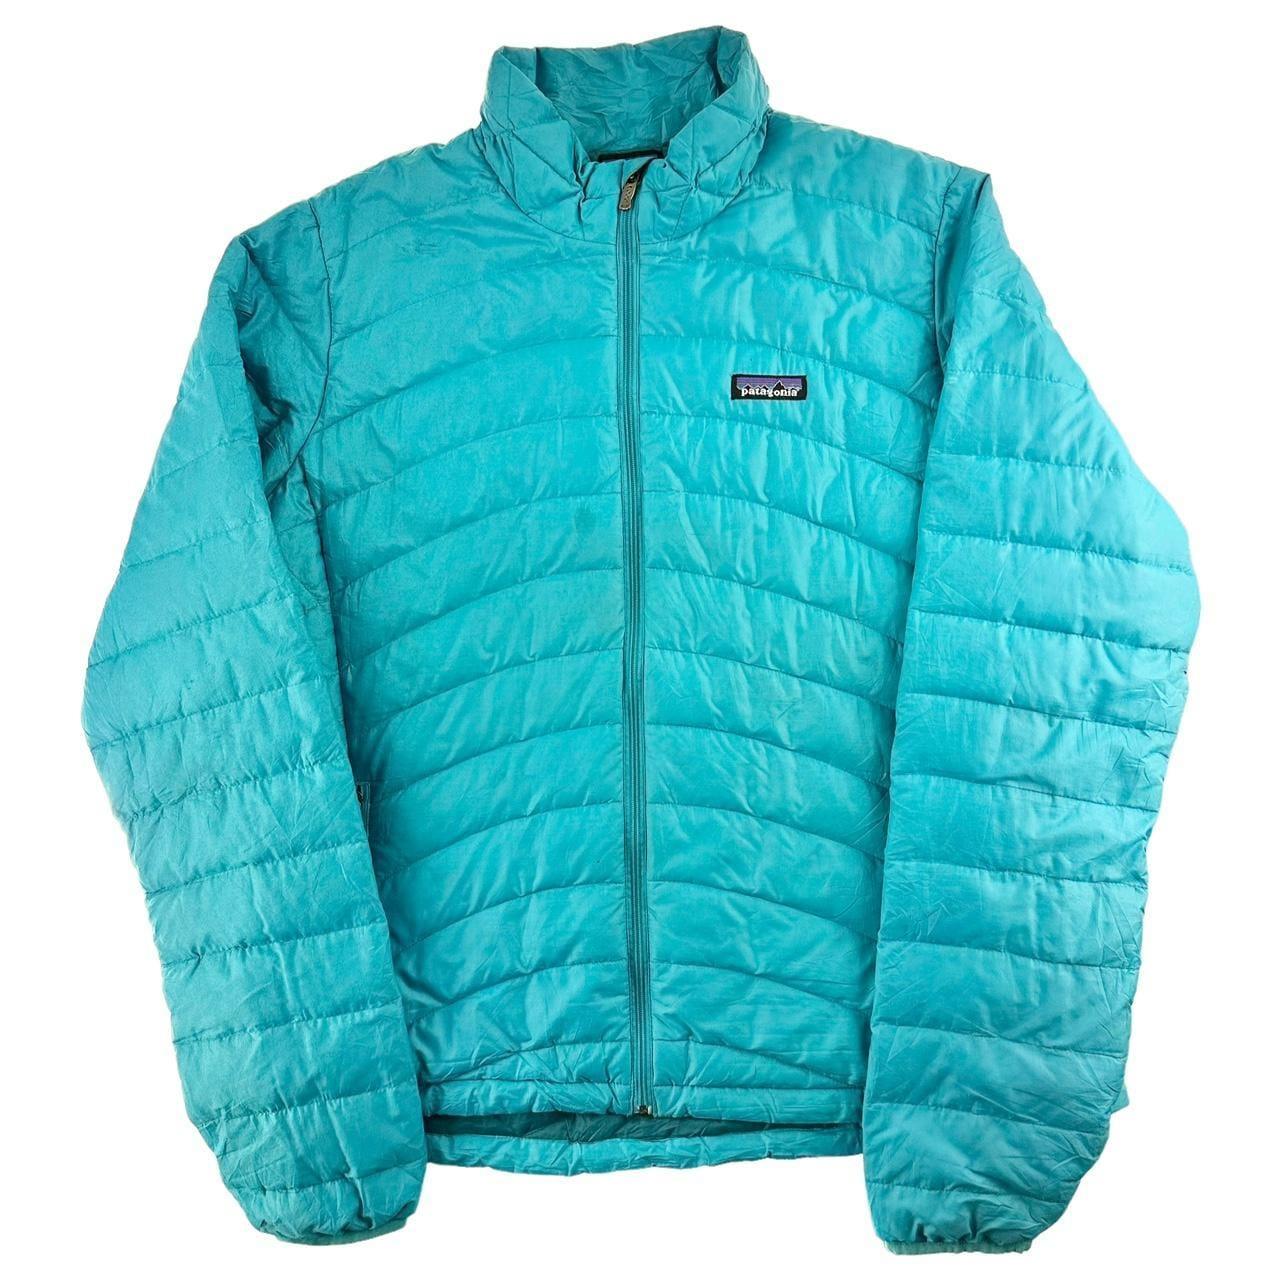 Patagonia padded jacket woman’s size XL - Known Source